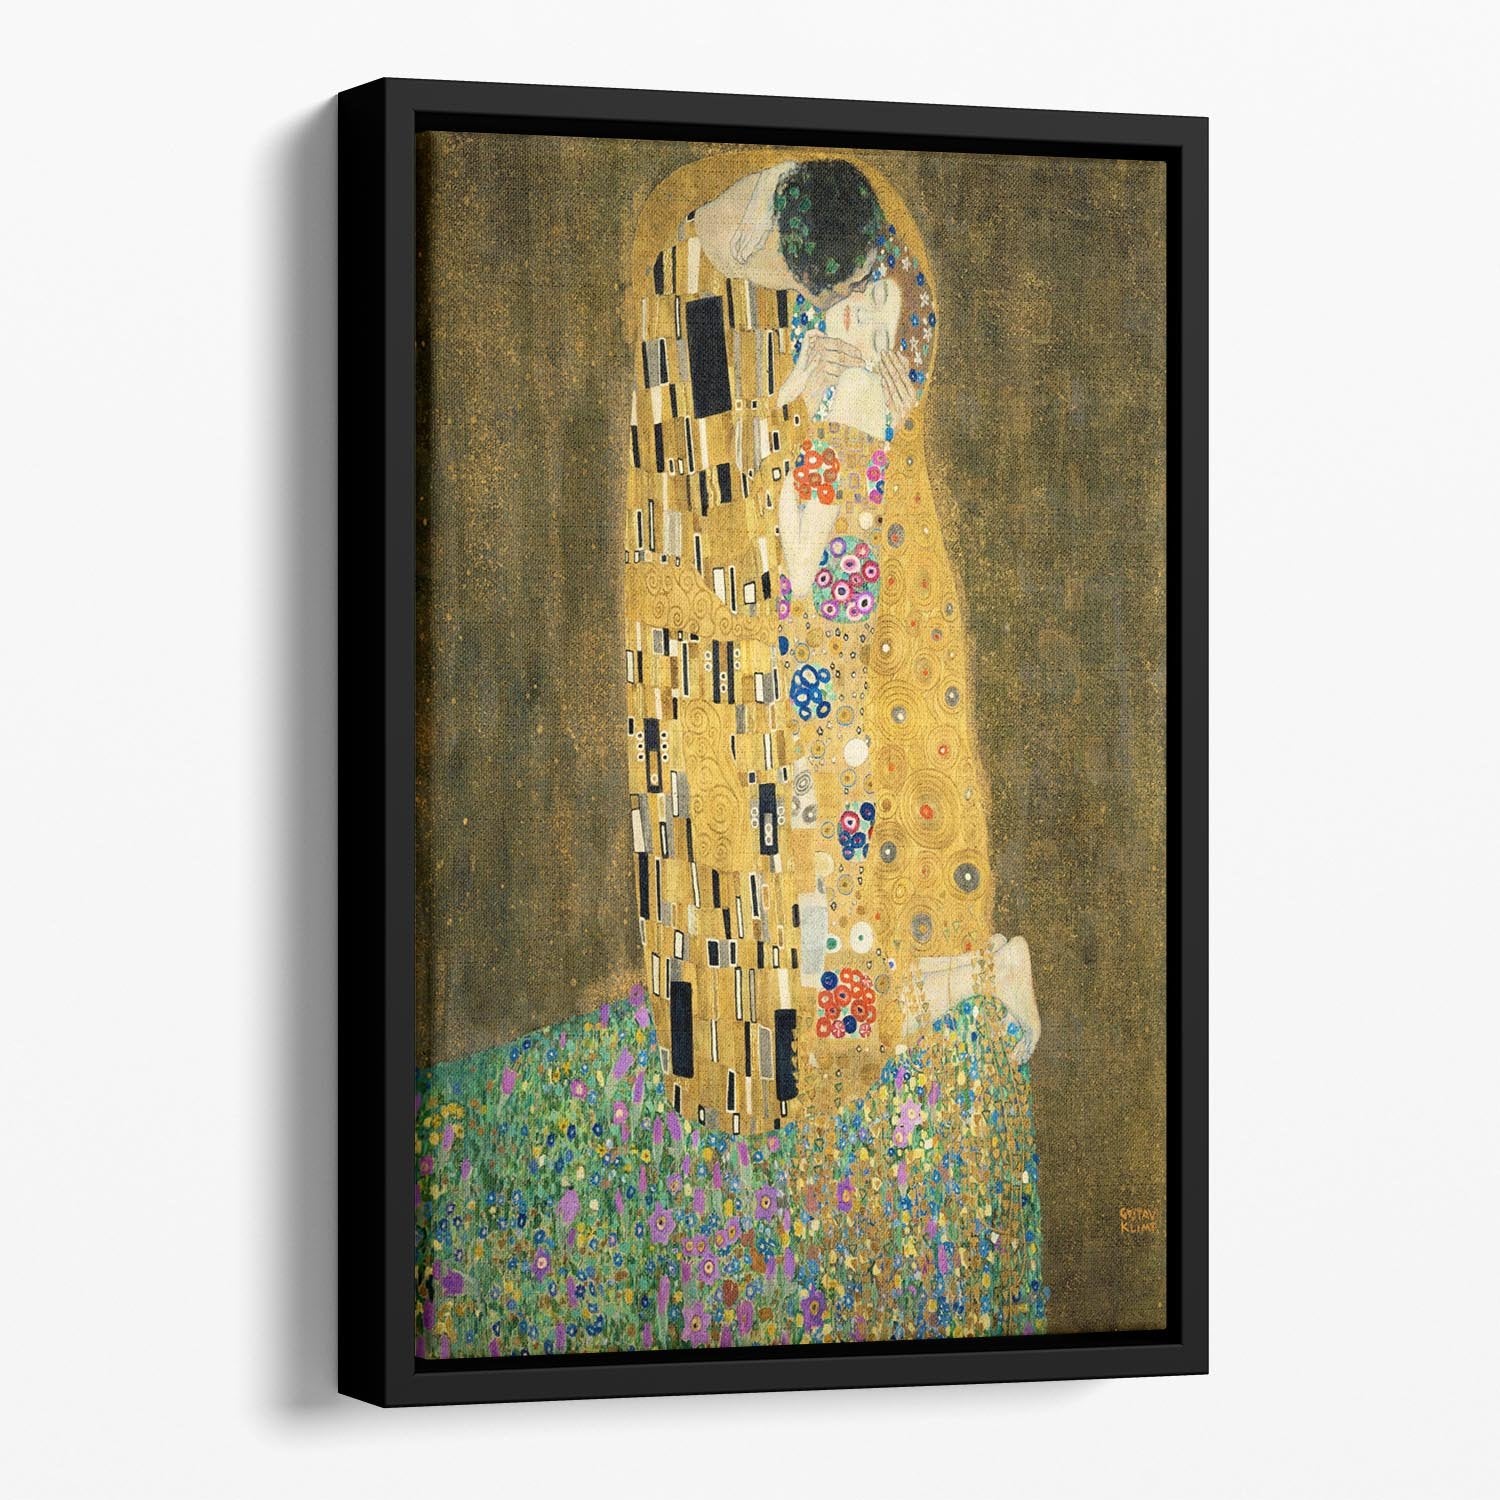 The Kiss by Klimt 2 Floating Framed Canvas